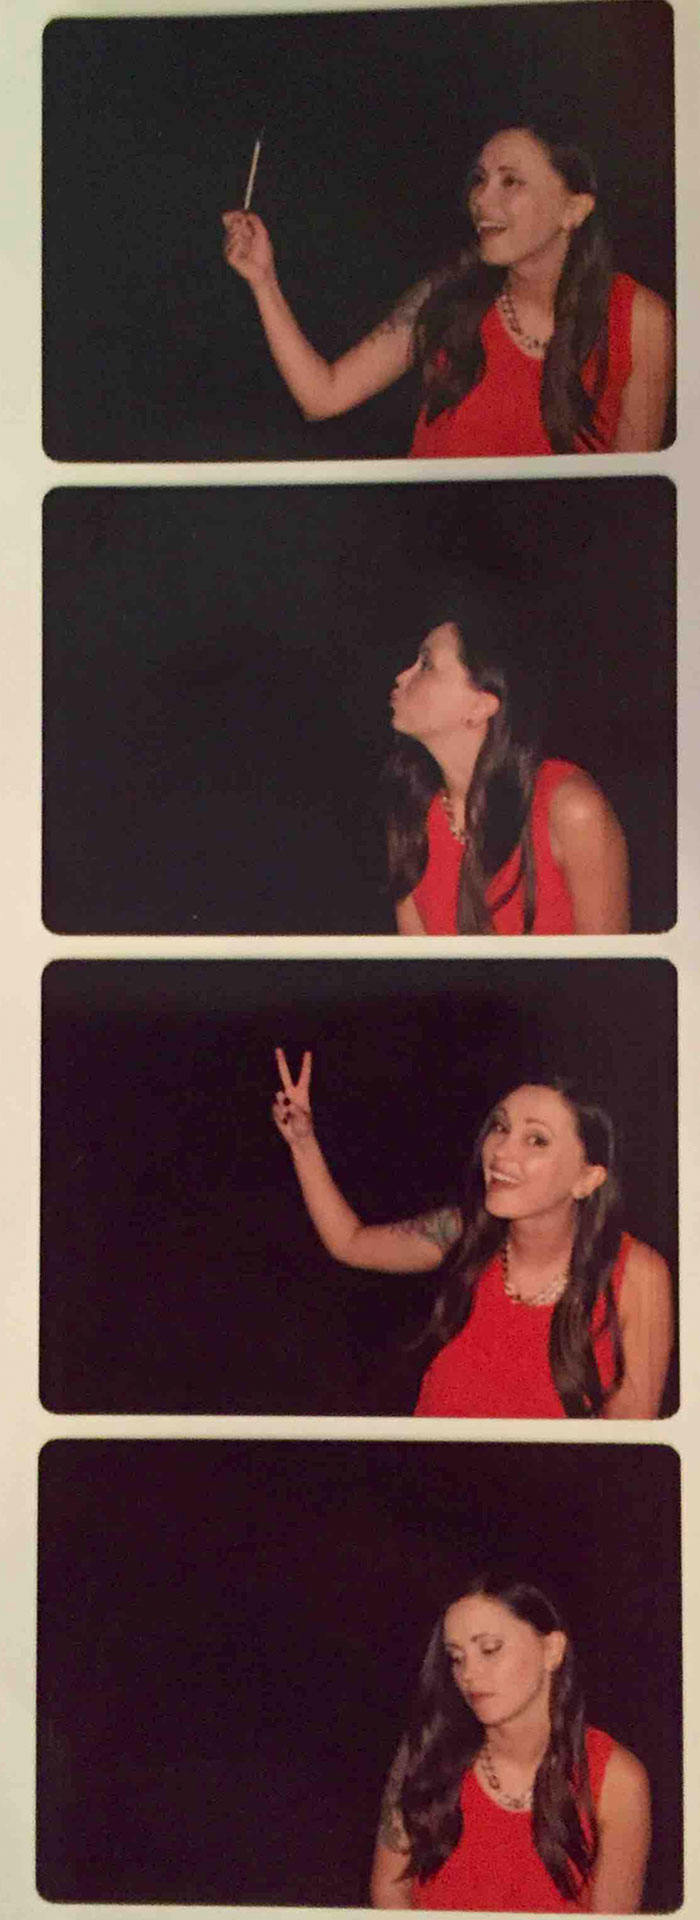 Sister Went To A Wedding Reception, Sent Me This Photo Booth Strip With The Caption "Forever Alone"